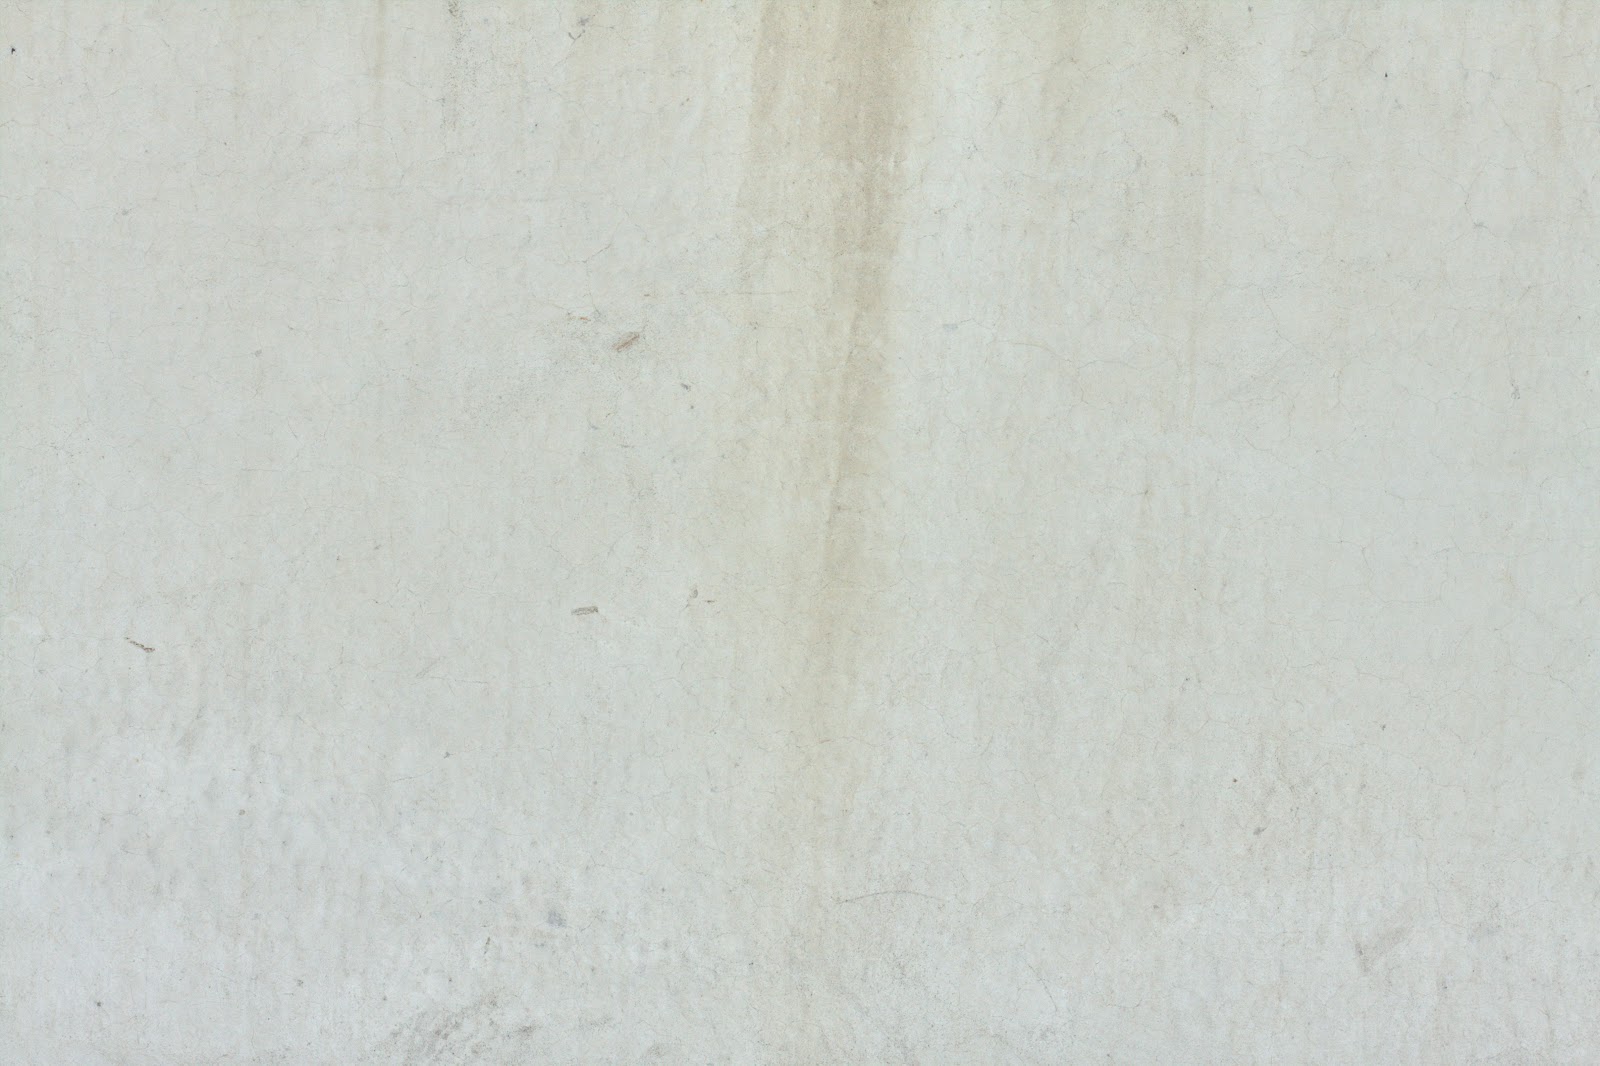 Concrete smooth white wash dirty wall texture ver2 4770x3178